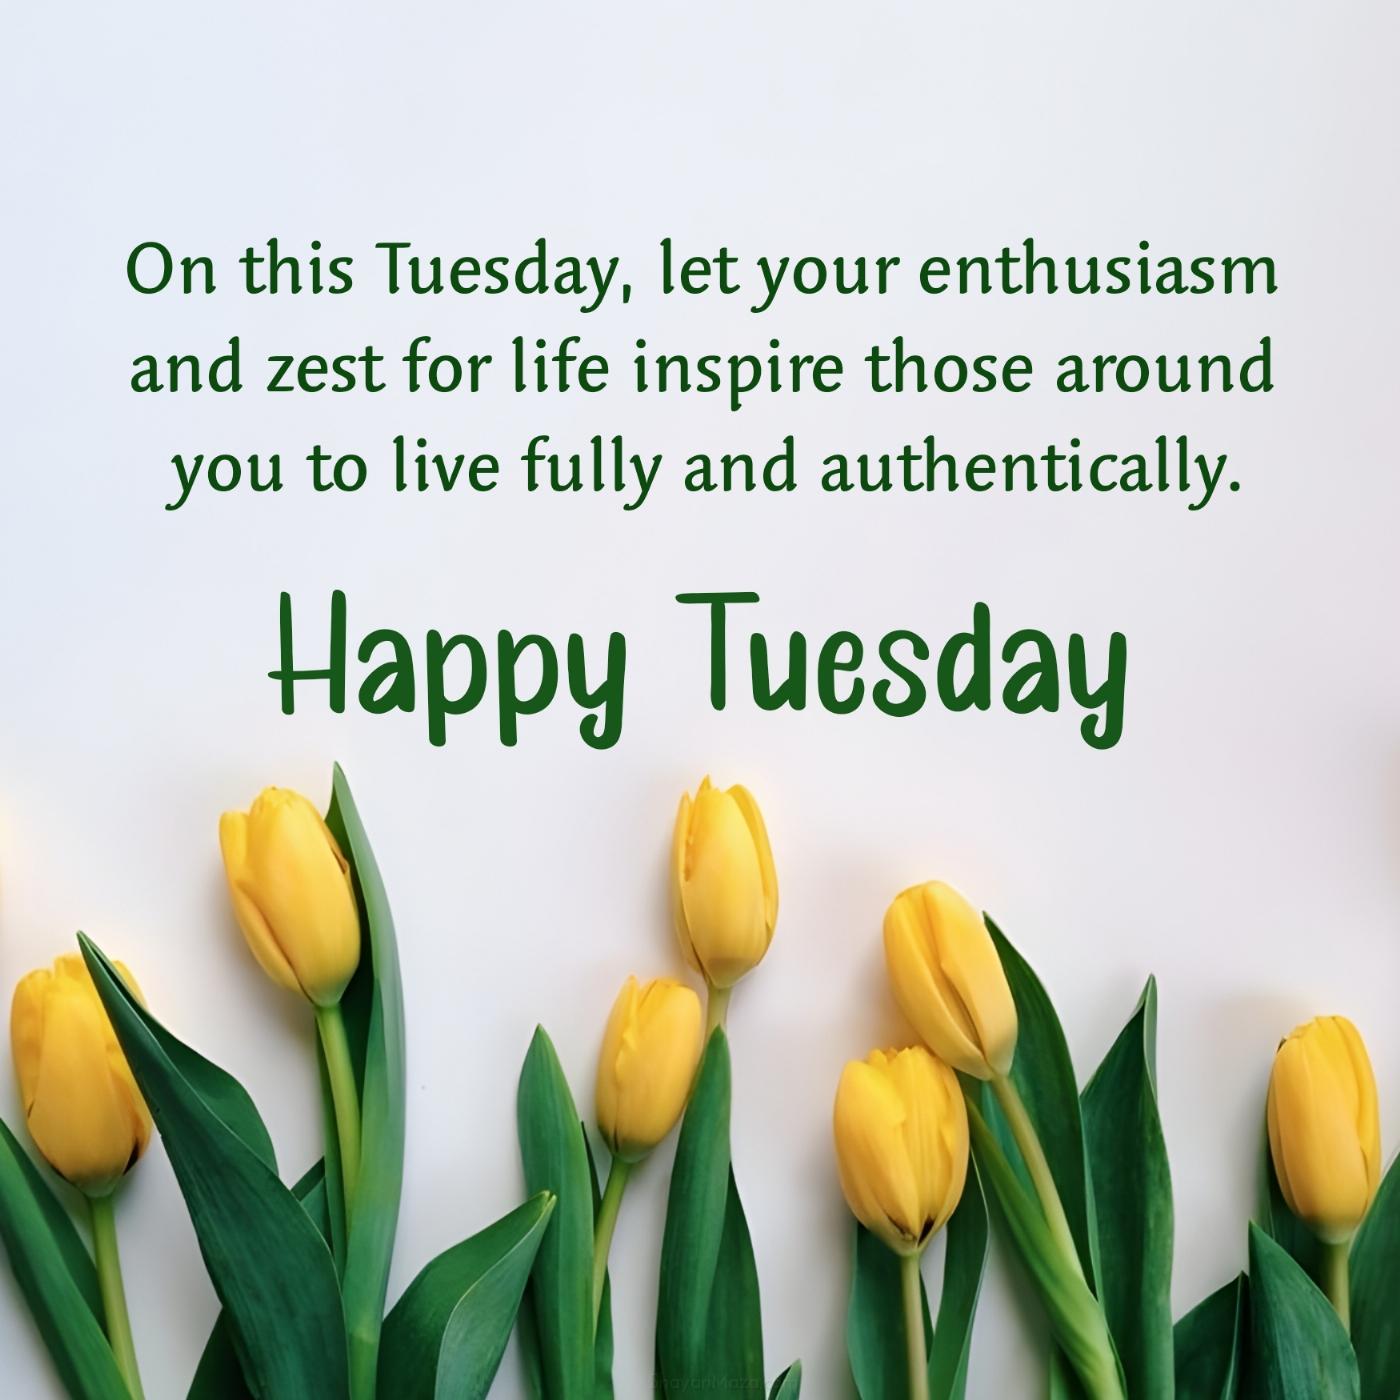 On this Tuesday let your enthusiasm and zest for life inspire